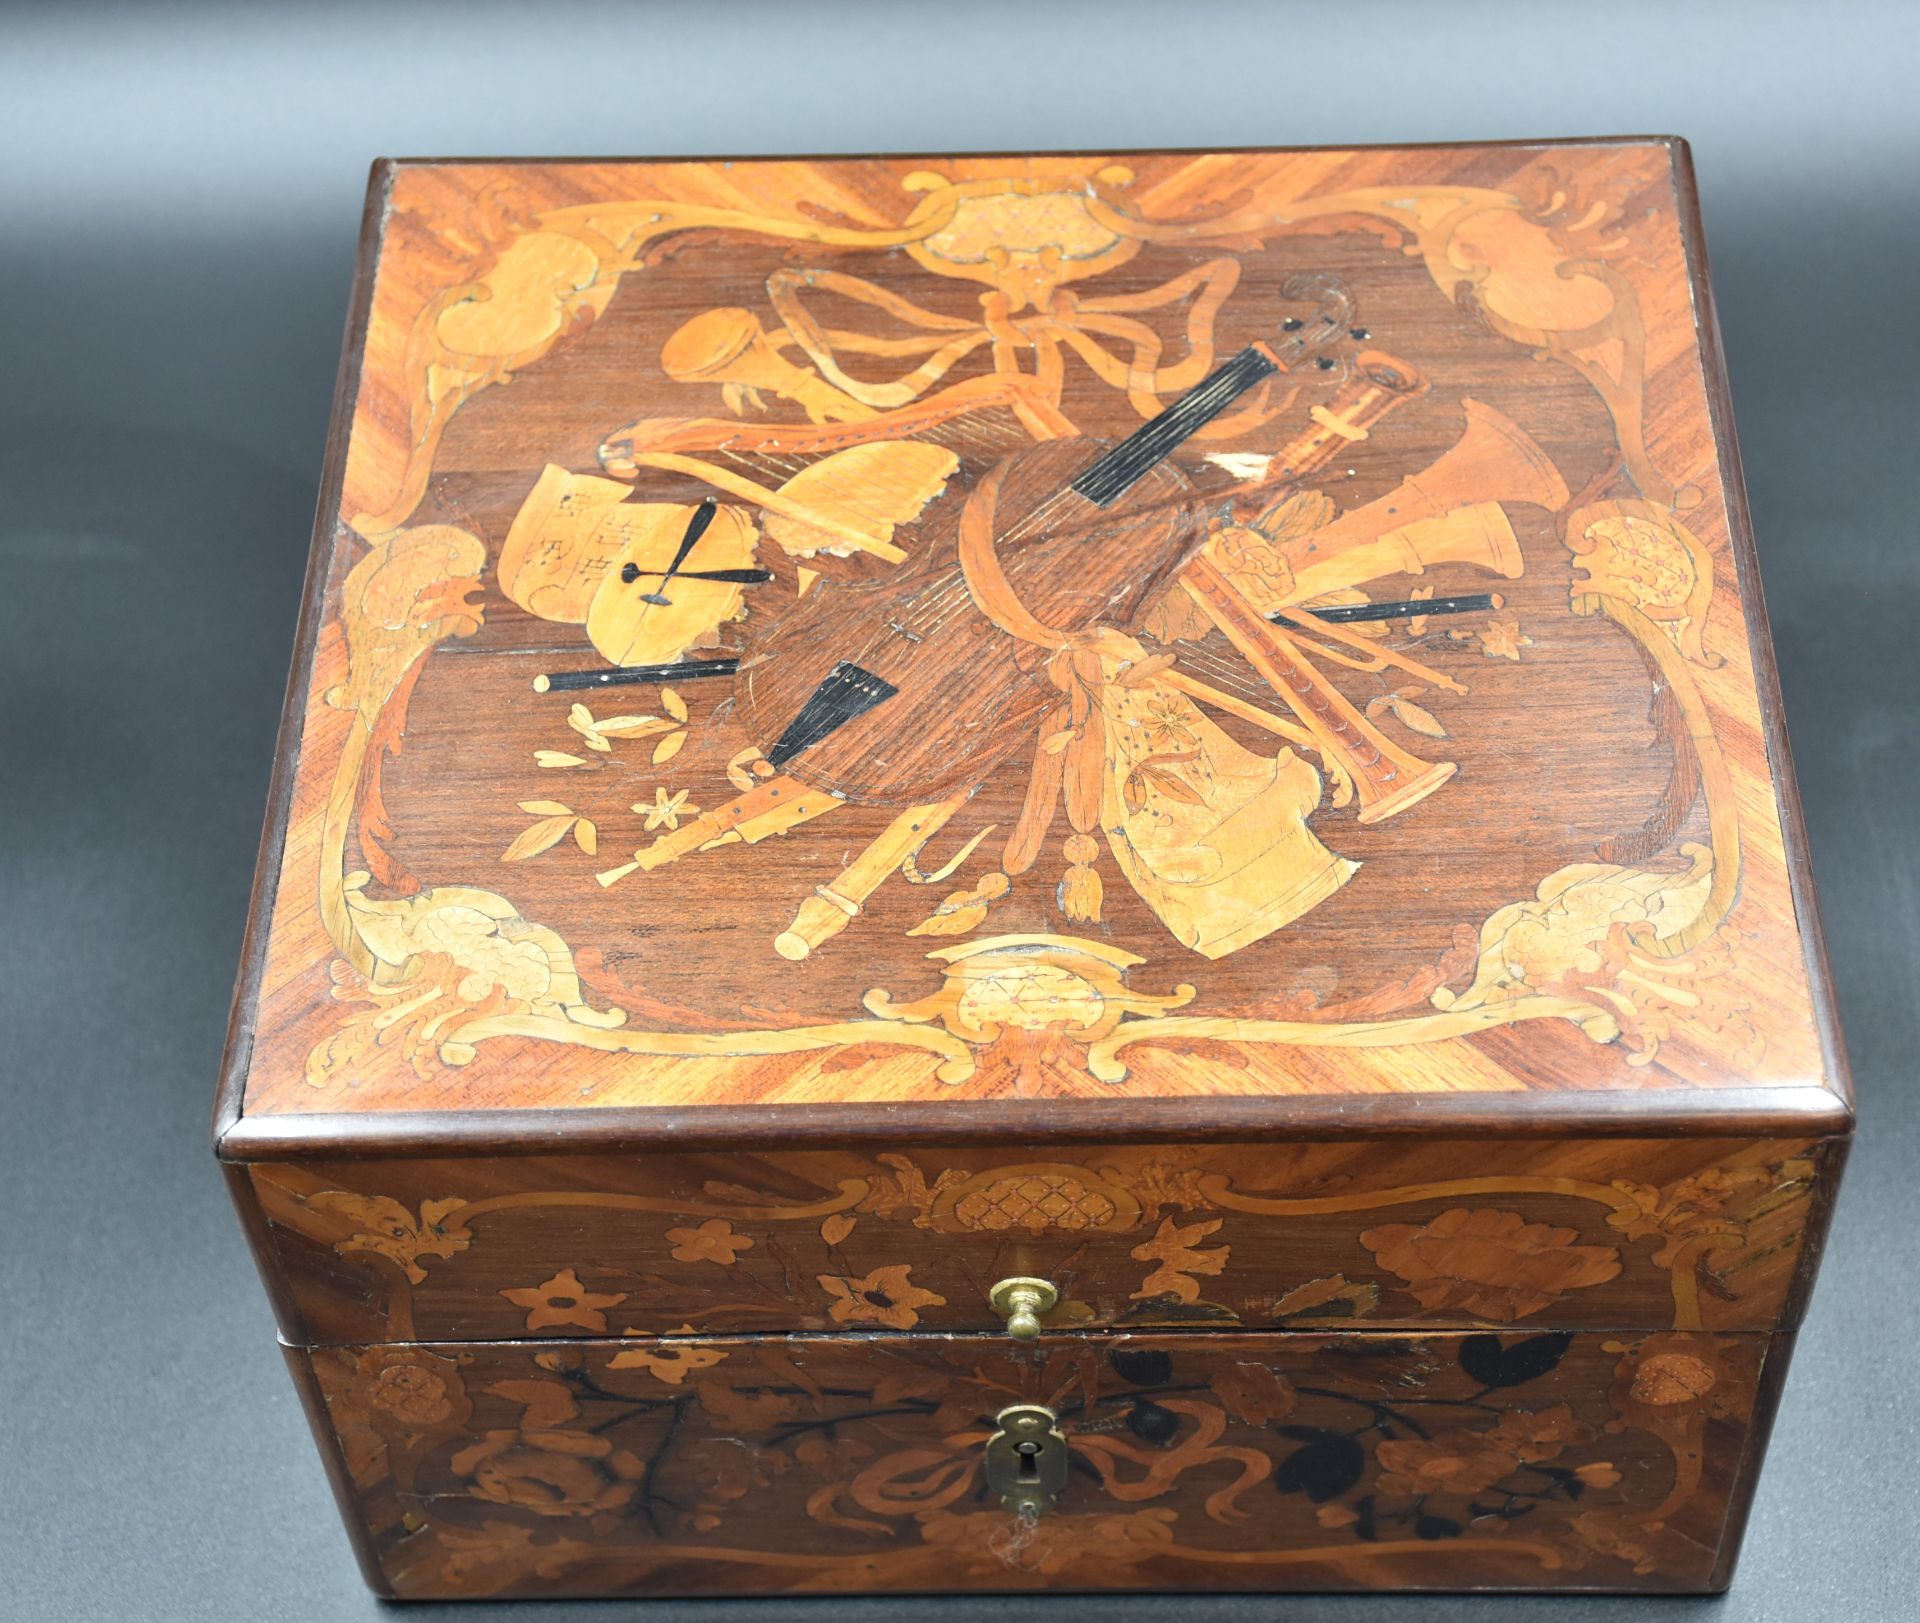 18th century box in marquetry of flowers and music trophies. Dimensions : 17 X 27 X 25 cm. Small - Image 2 of 4